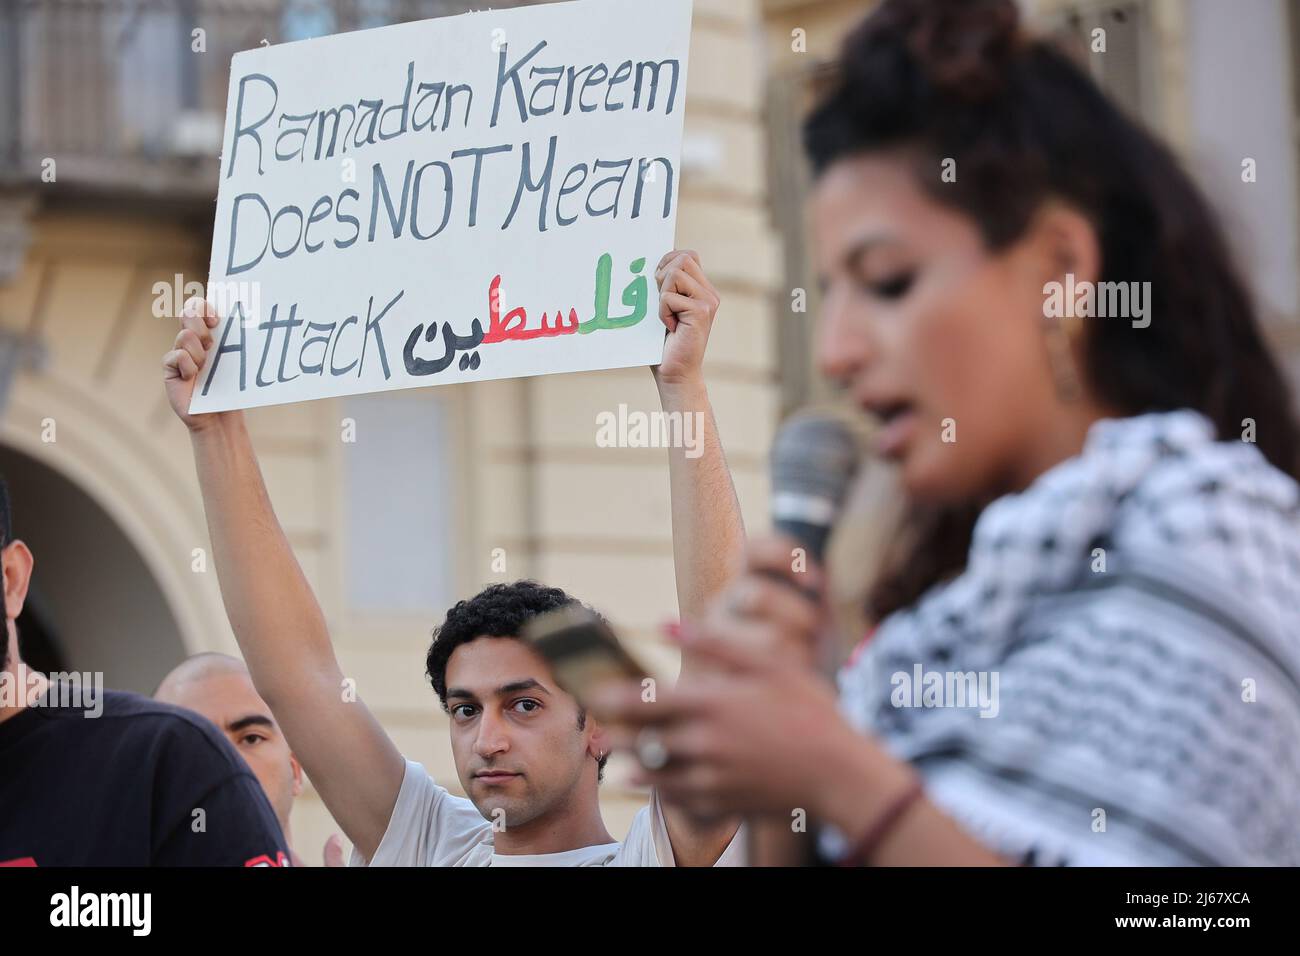 Turin, Italy. 28th April, 2022. A man protests against the raids of Israeli forces in West Bank and restrictions on access to holy sites in Jerusalem during the Ramadan time holding a placard showing:“Ramadan Kareem does not mean attack”. Credit: MLBARIONA/Alamy Live News Stock Photo